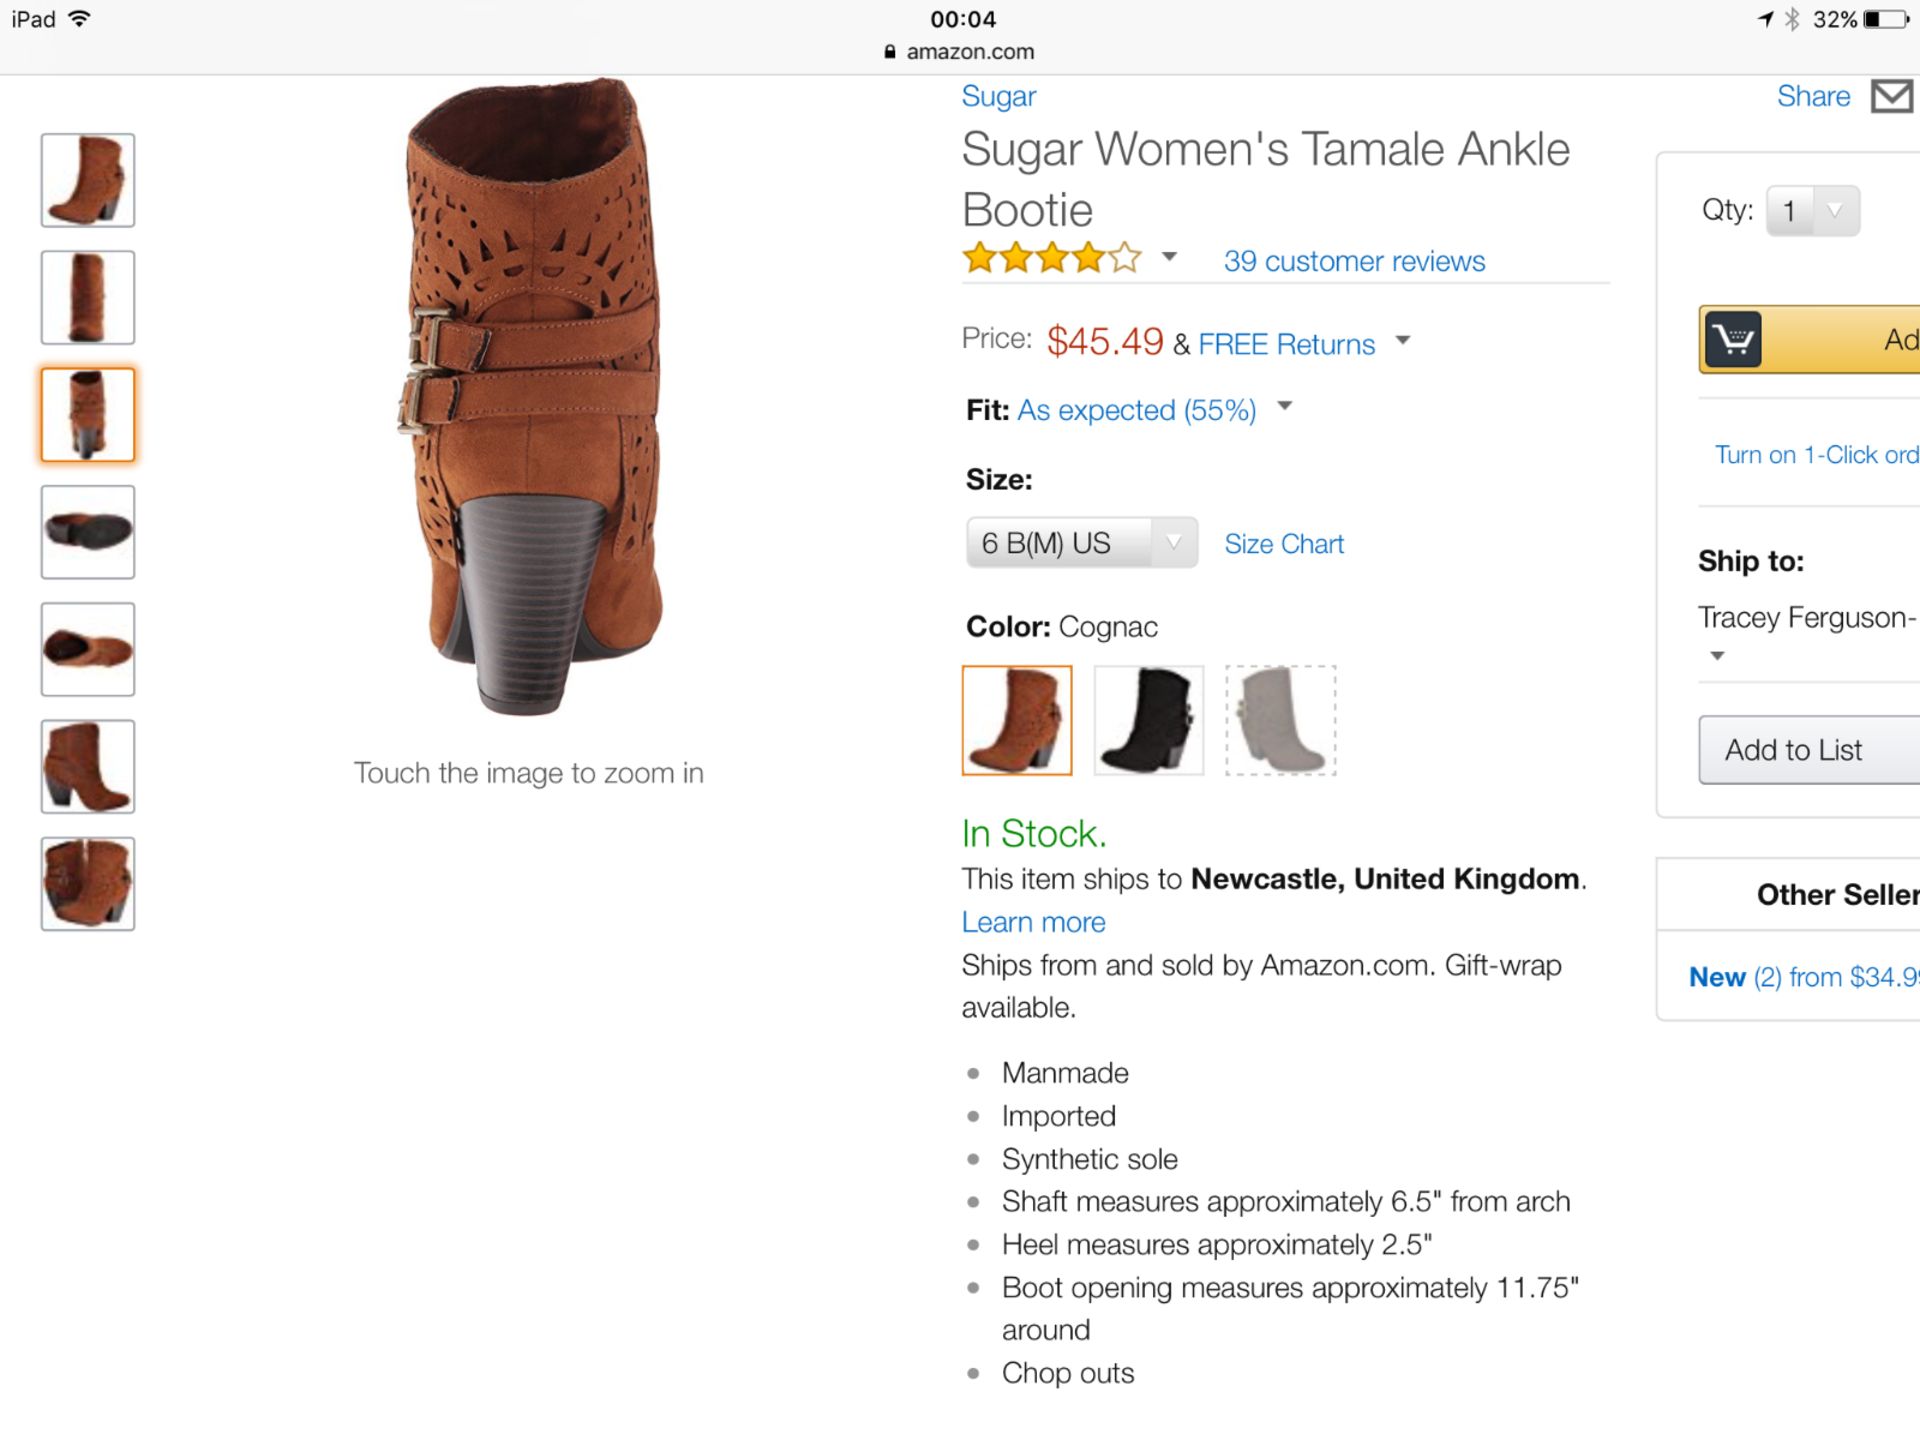 Sugar Women's Tamale Ankle Bootie, Size US Eur 36 UK 4 (New with box) [Ref: B-002] - Image 3 of 8